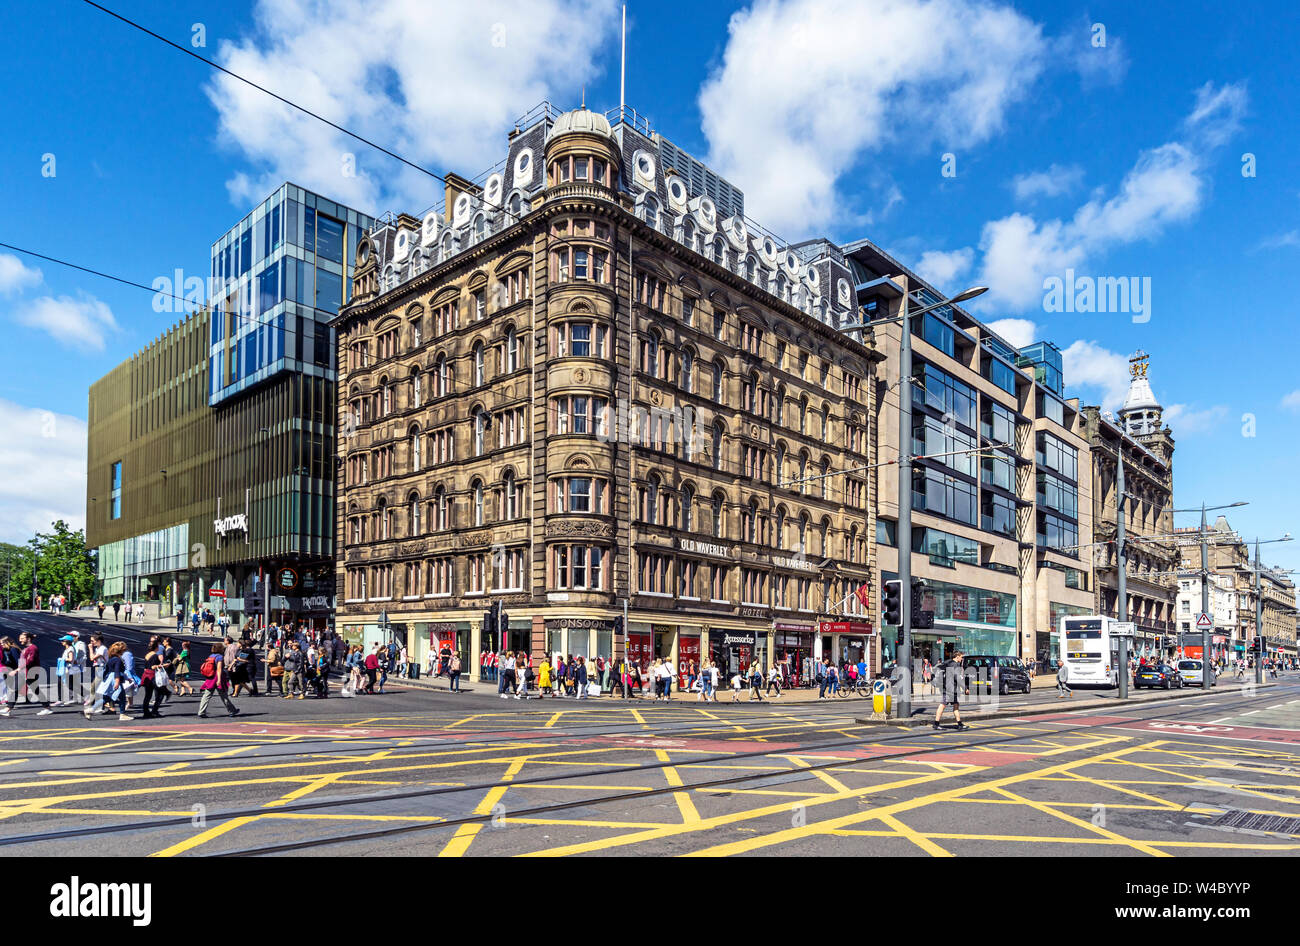 The Old Waverley Hotel on the corner of South St. David Street and Princes Street in Edinburgh Scotland UK with tourists and pedestrians Stock Photo